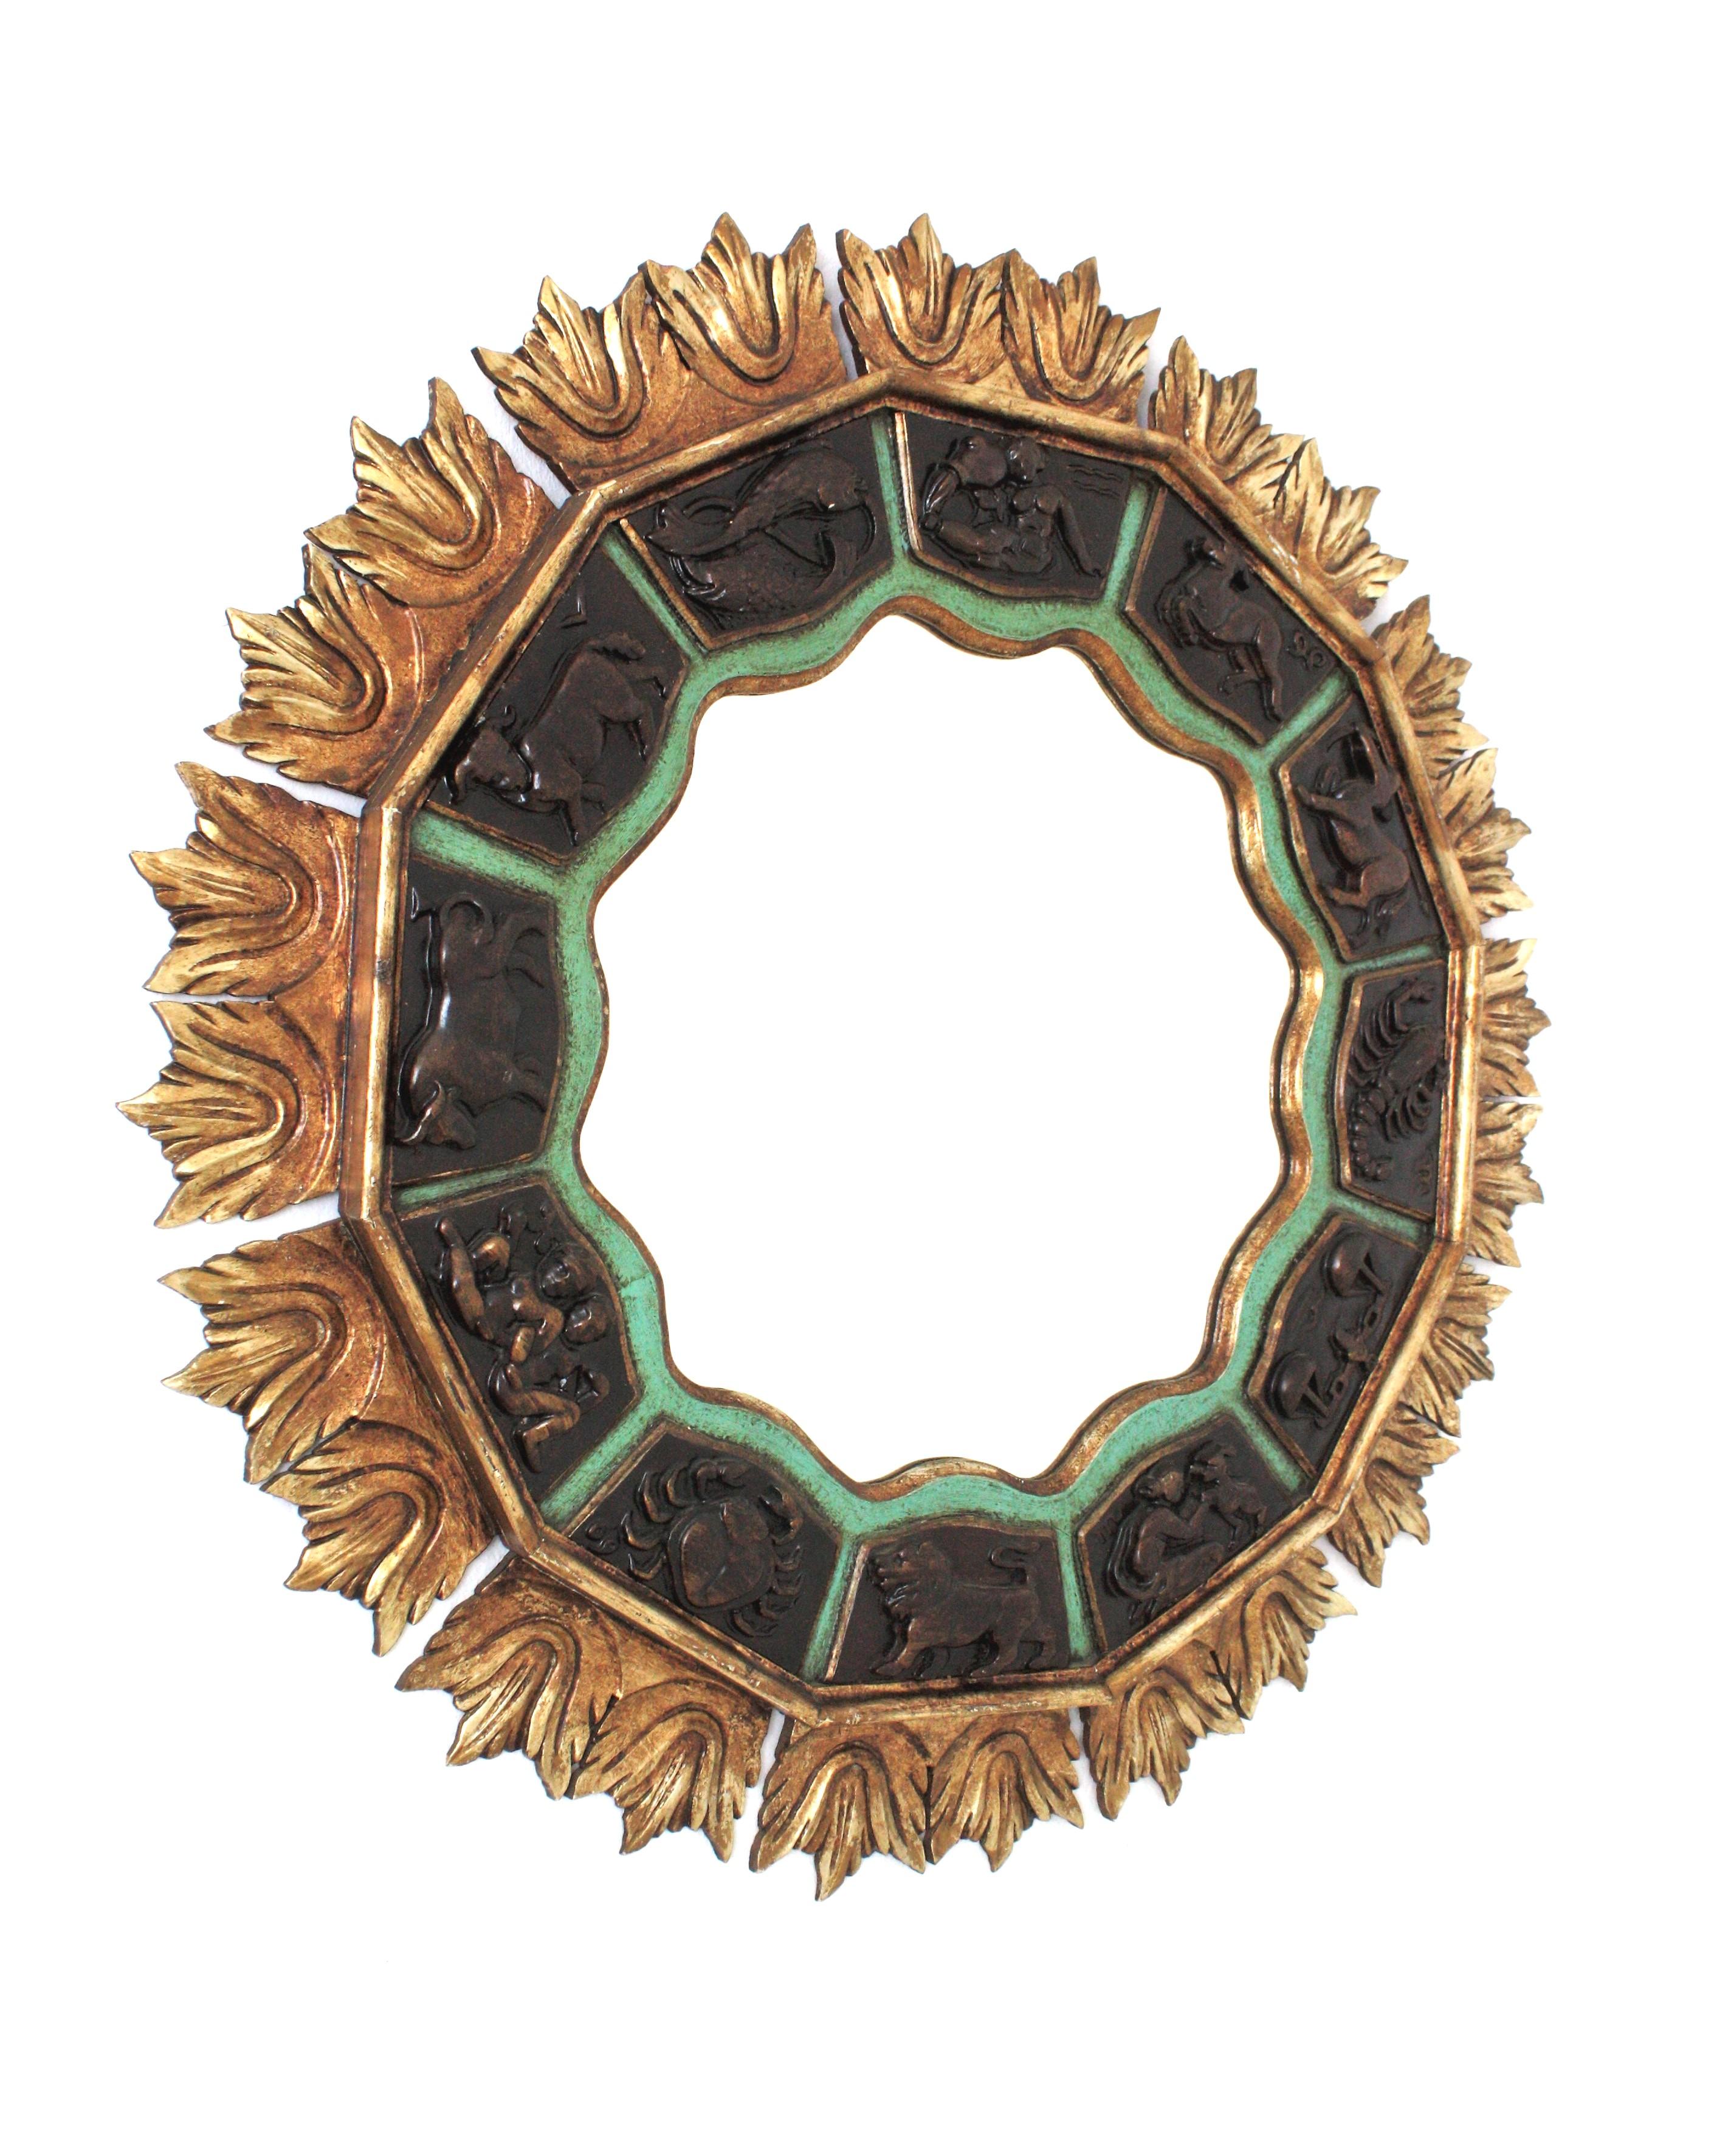 Baroque Revival Sunburst Zodiac Mirror with Carved Giltwood & Green Frame, 1950s For Sale